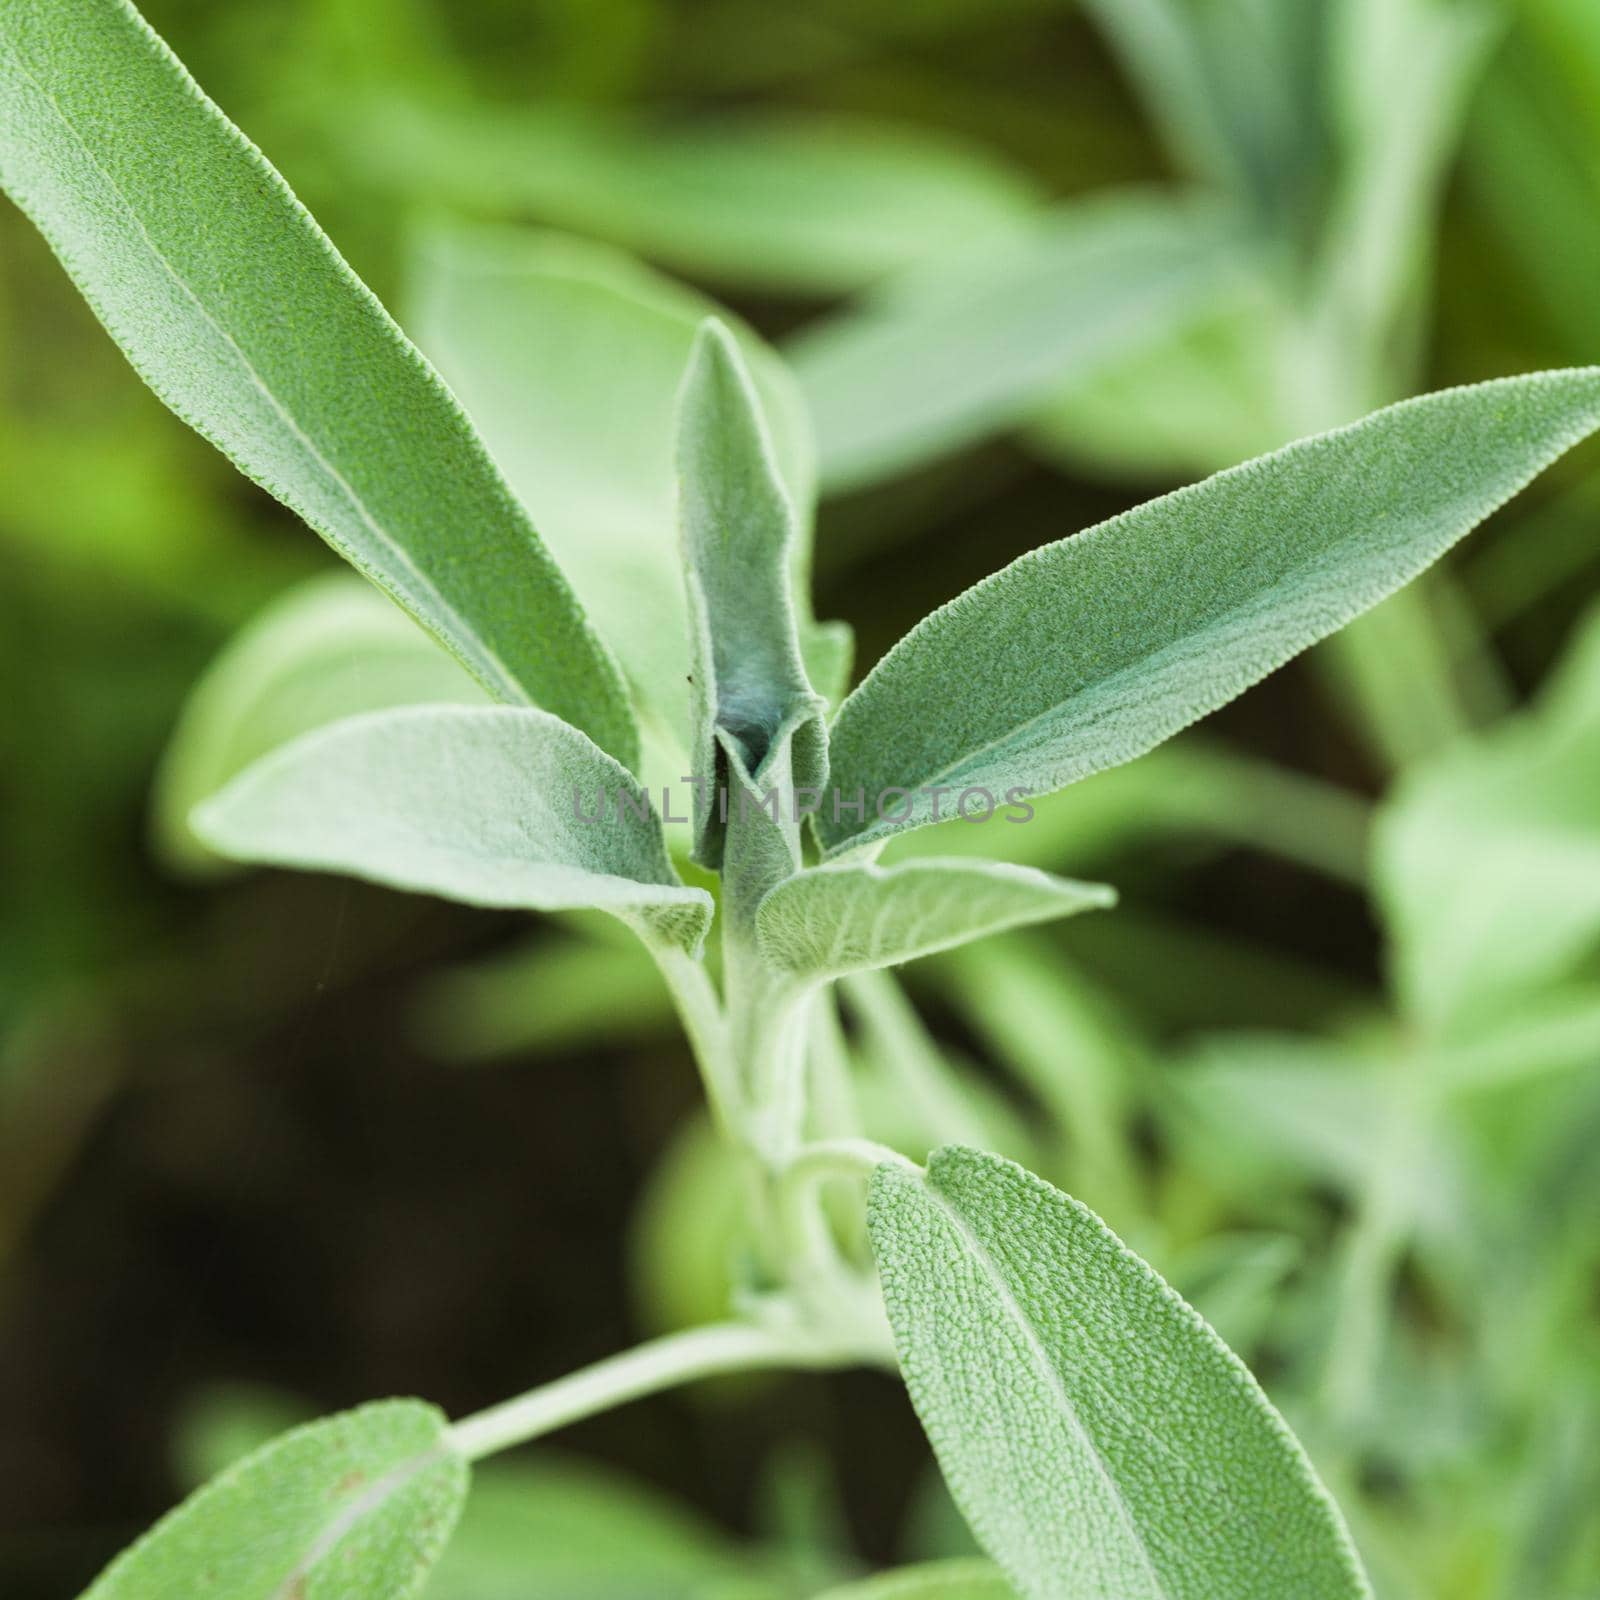 Sage plant in the garde, macro view of leaves